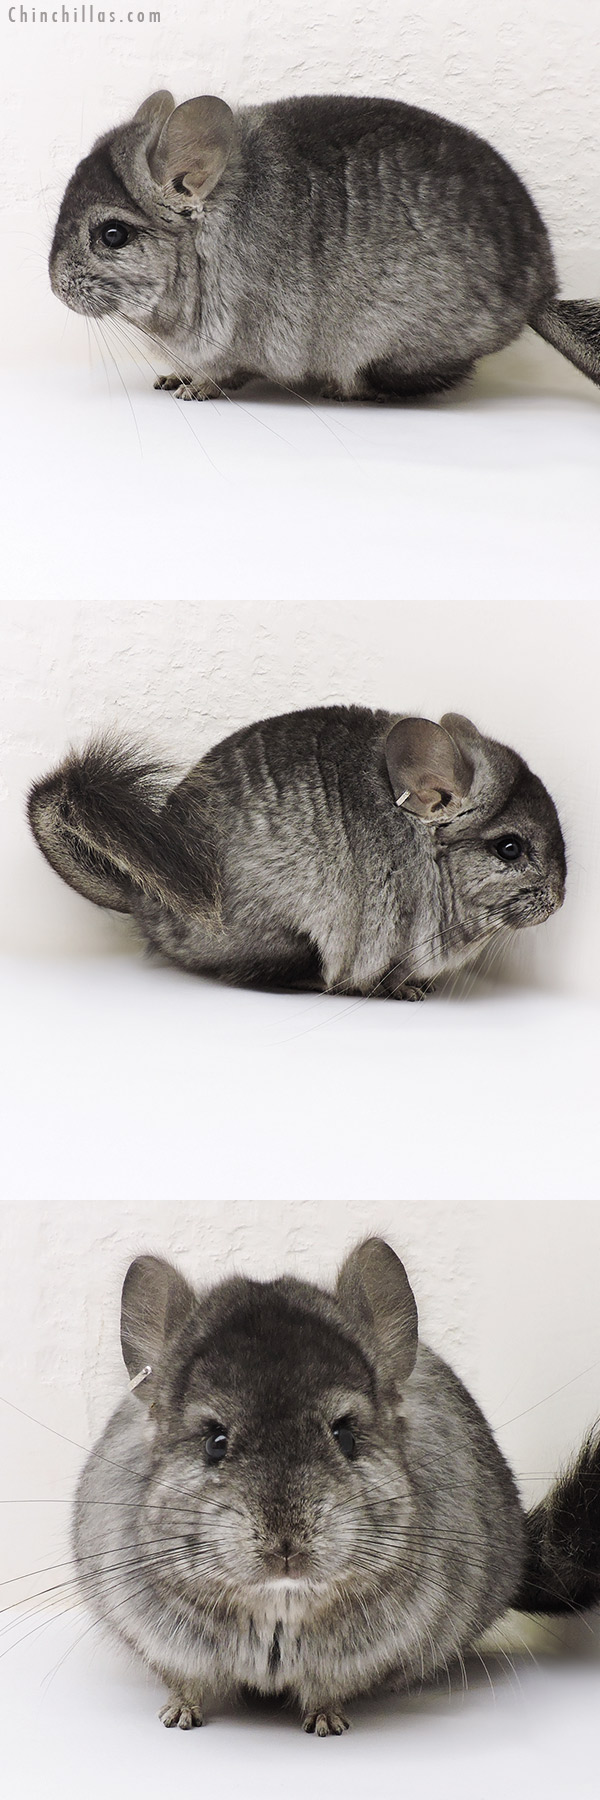 Chinchilla or related item offered for sale or export on Chinchillas.com - 17149 Ebony  Royal Persian Angora Male Chinchilla